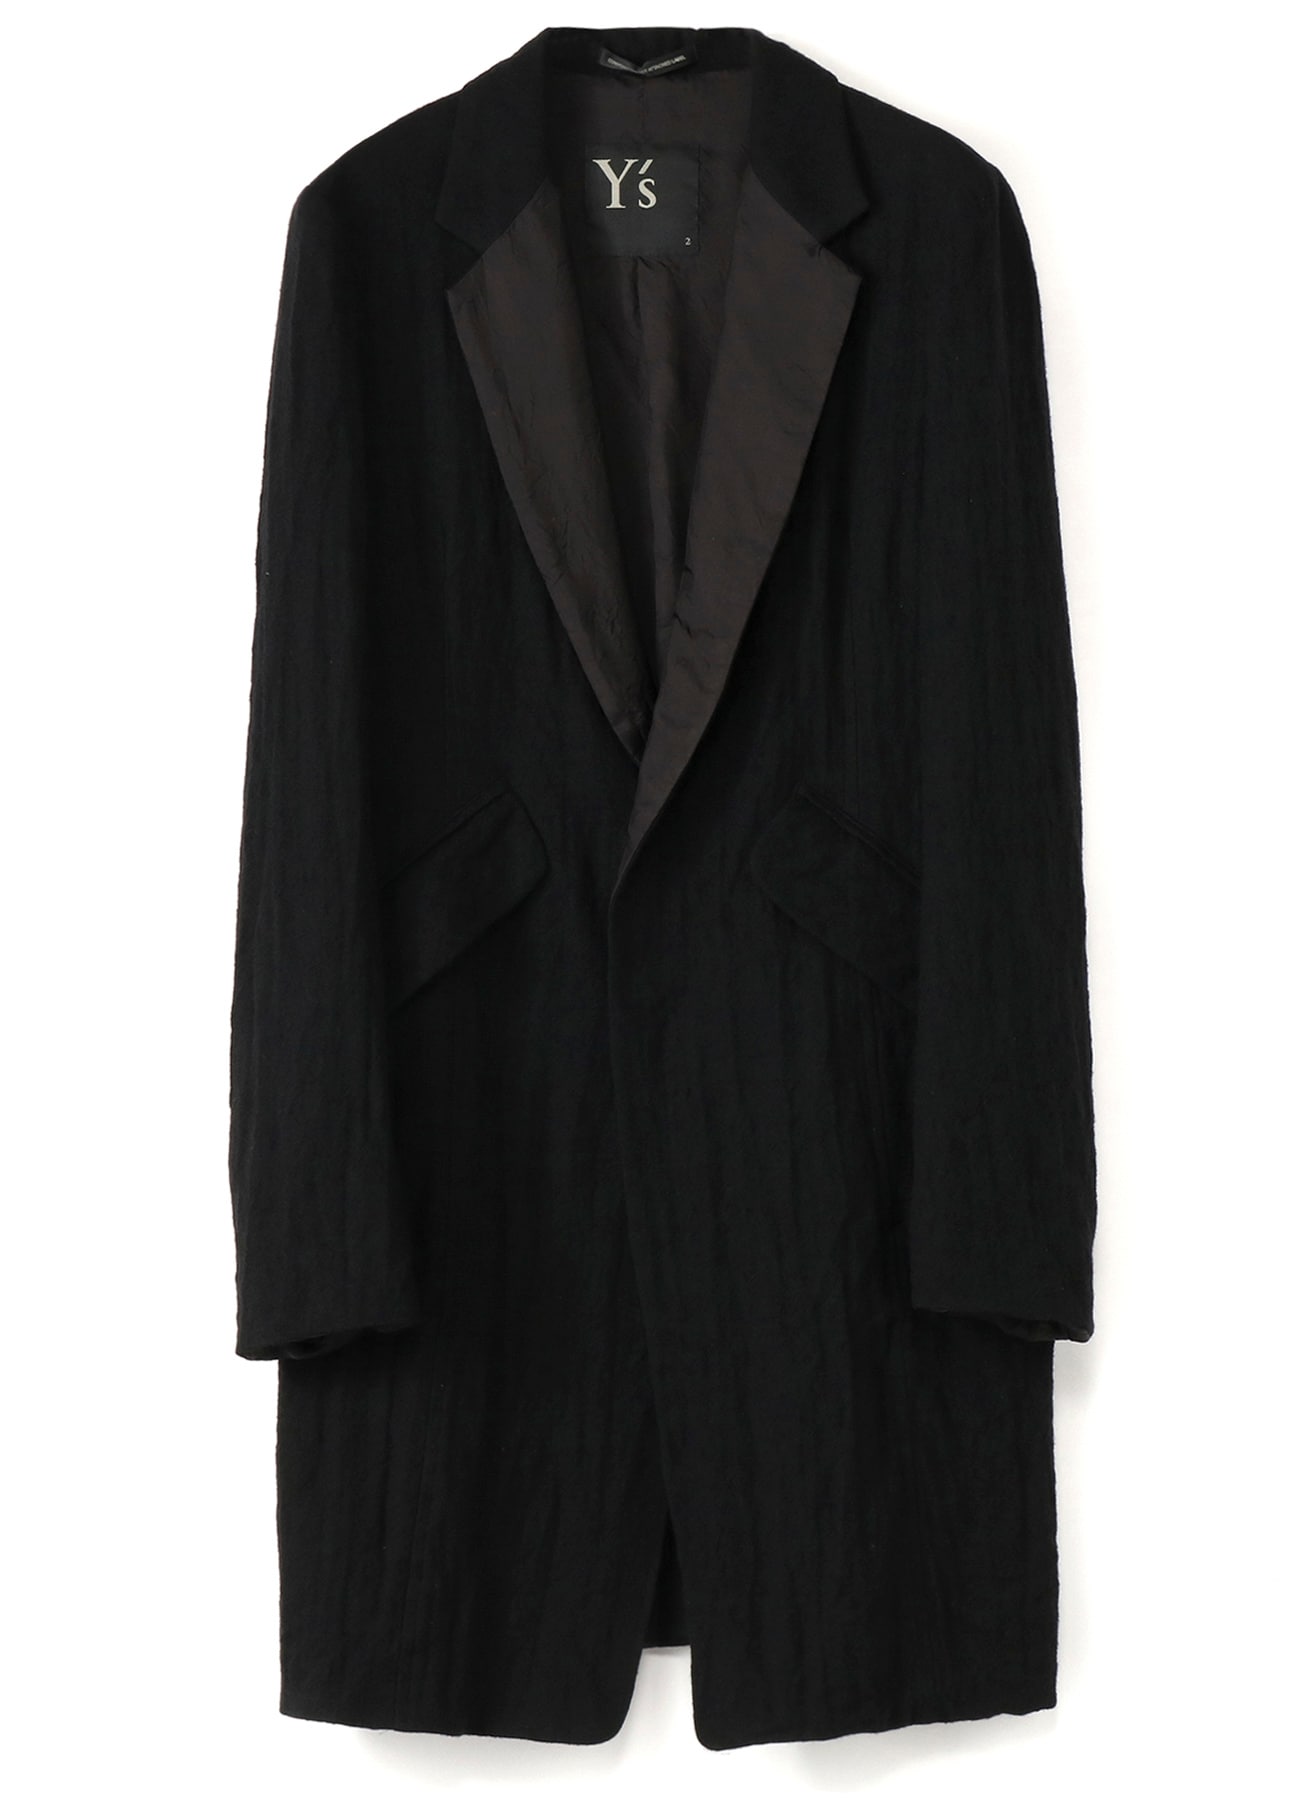 WOOL ROUGH TWILL GARMENT MILLING LONG TAILORED JACKET